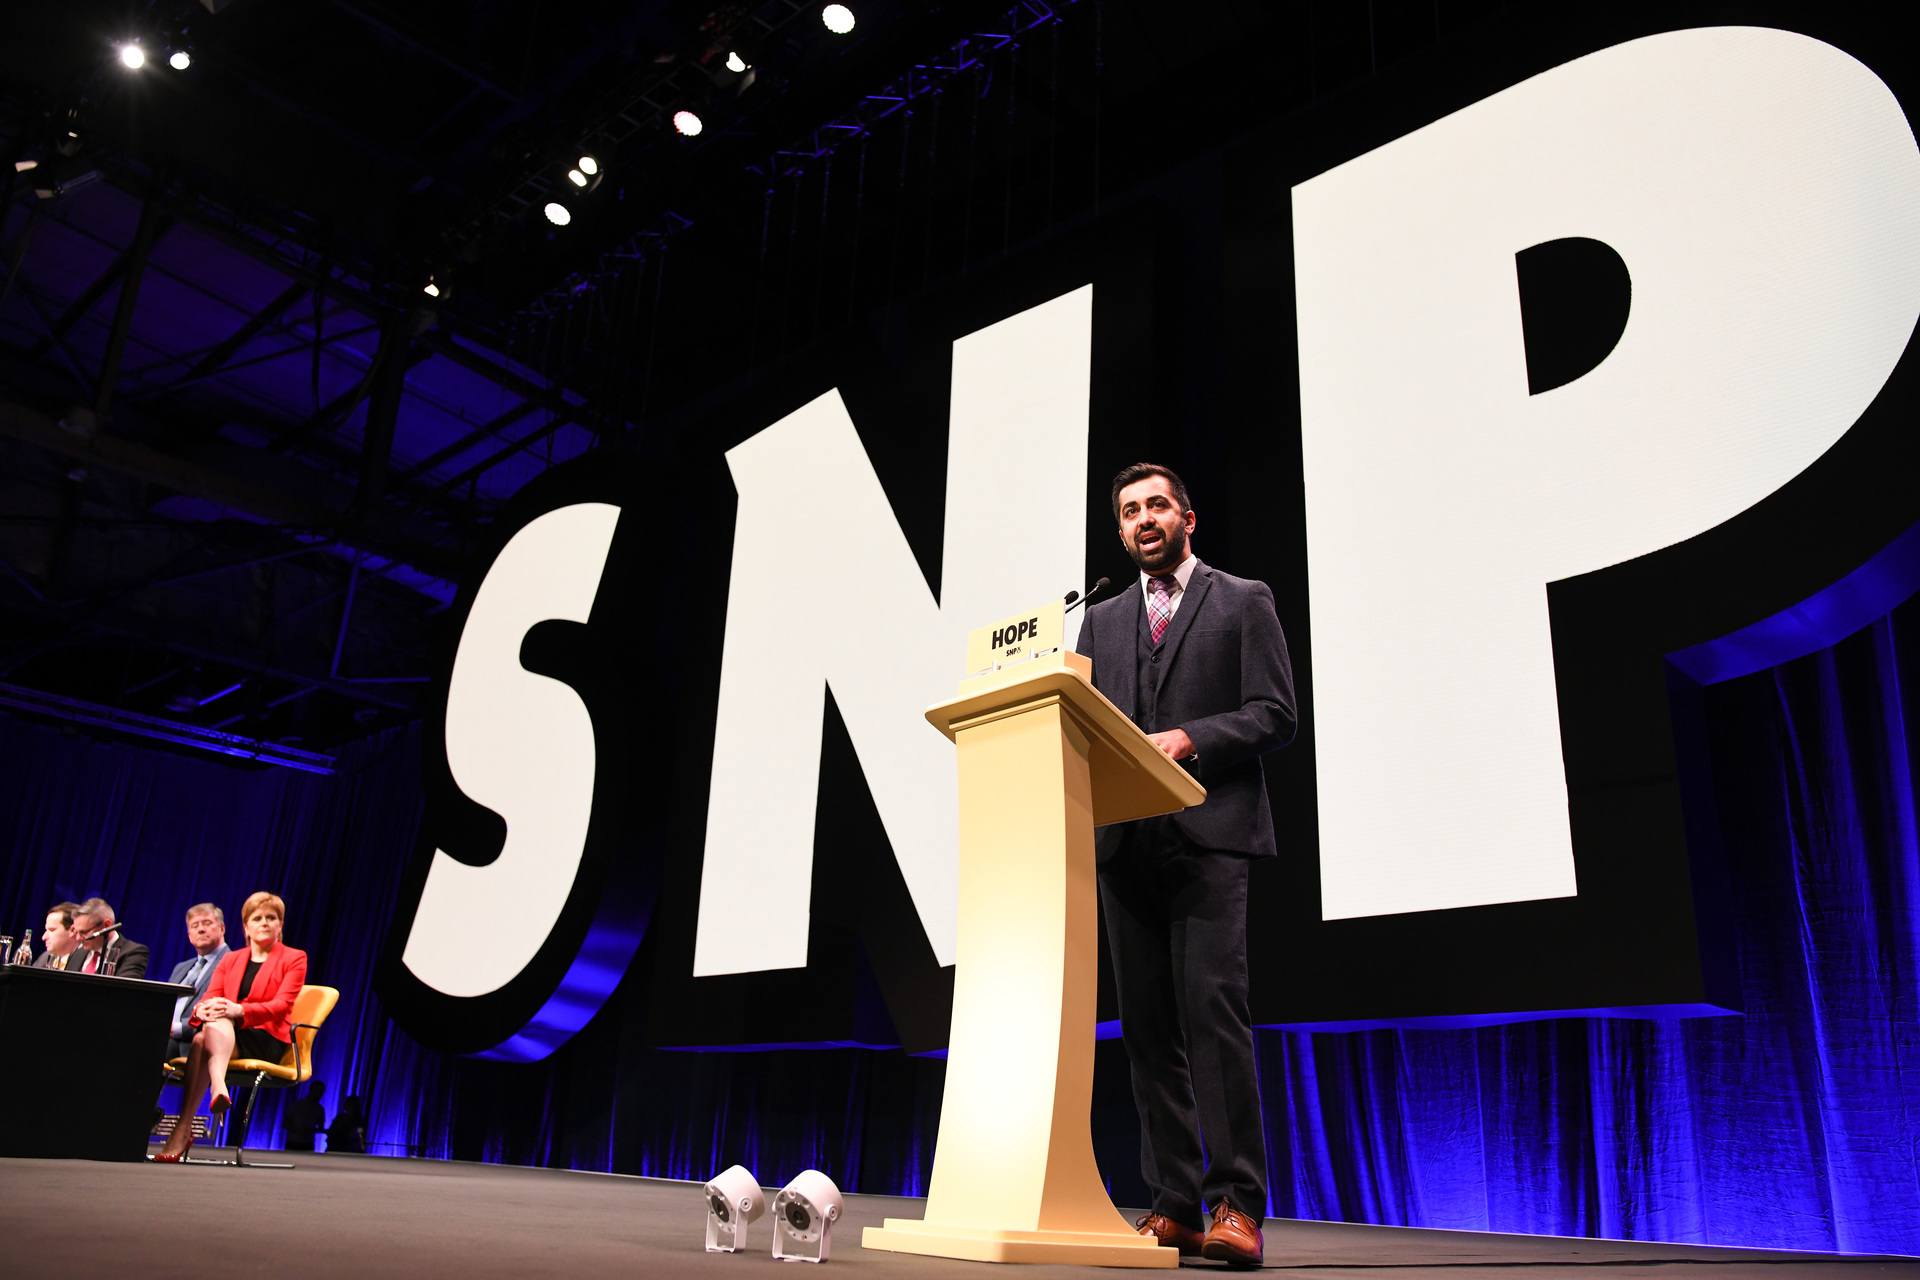 Humza Yousaf MSP, cabinet secretary for Justice, makes his keynote speech at the 84th annual SNP conference at the  Scottish Exhibition and Conference Centre on October 7, 2018 in Glasgow.